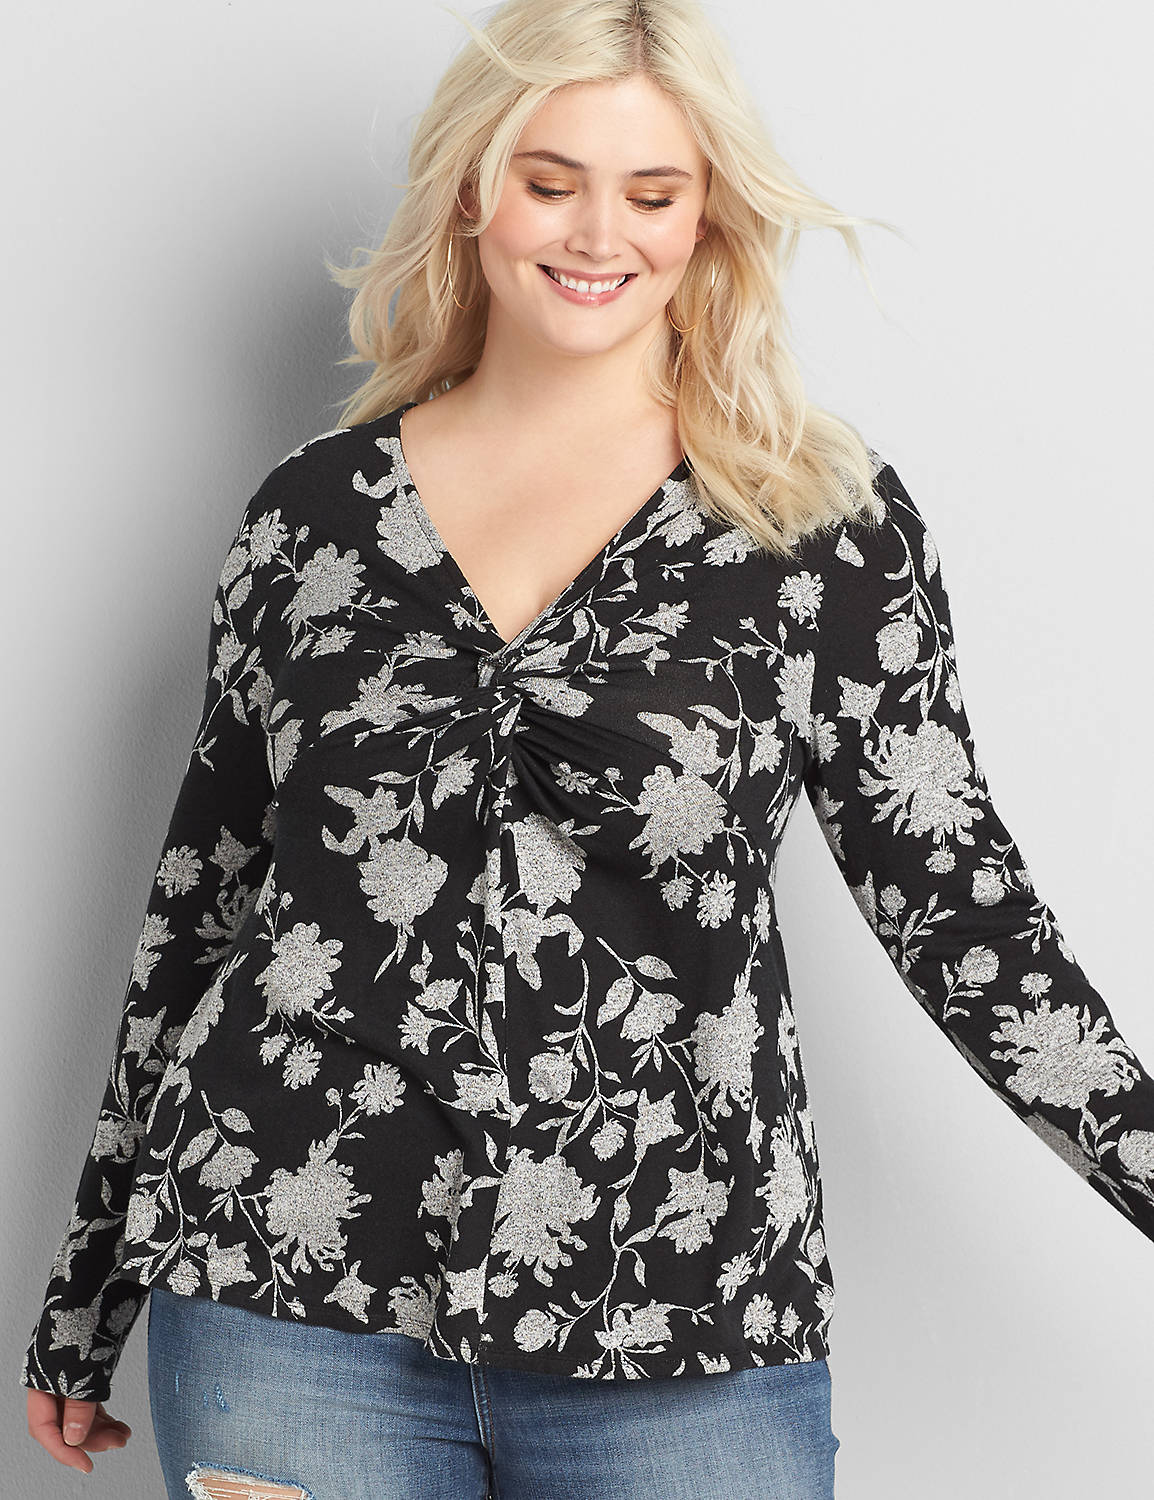 Printed Softest Touch Twist-Front Subtle Swing Top Product Image 1